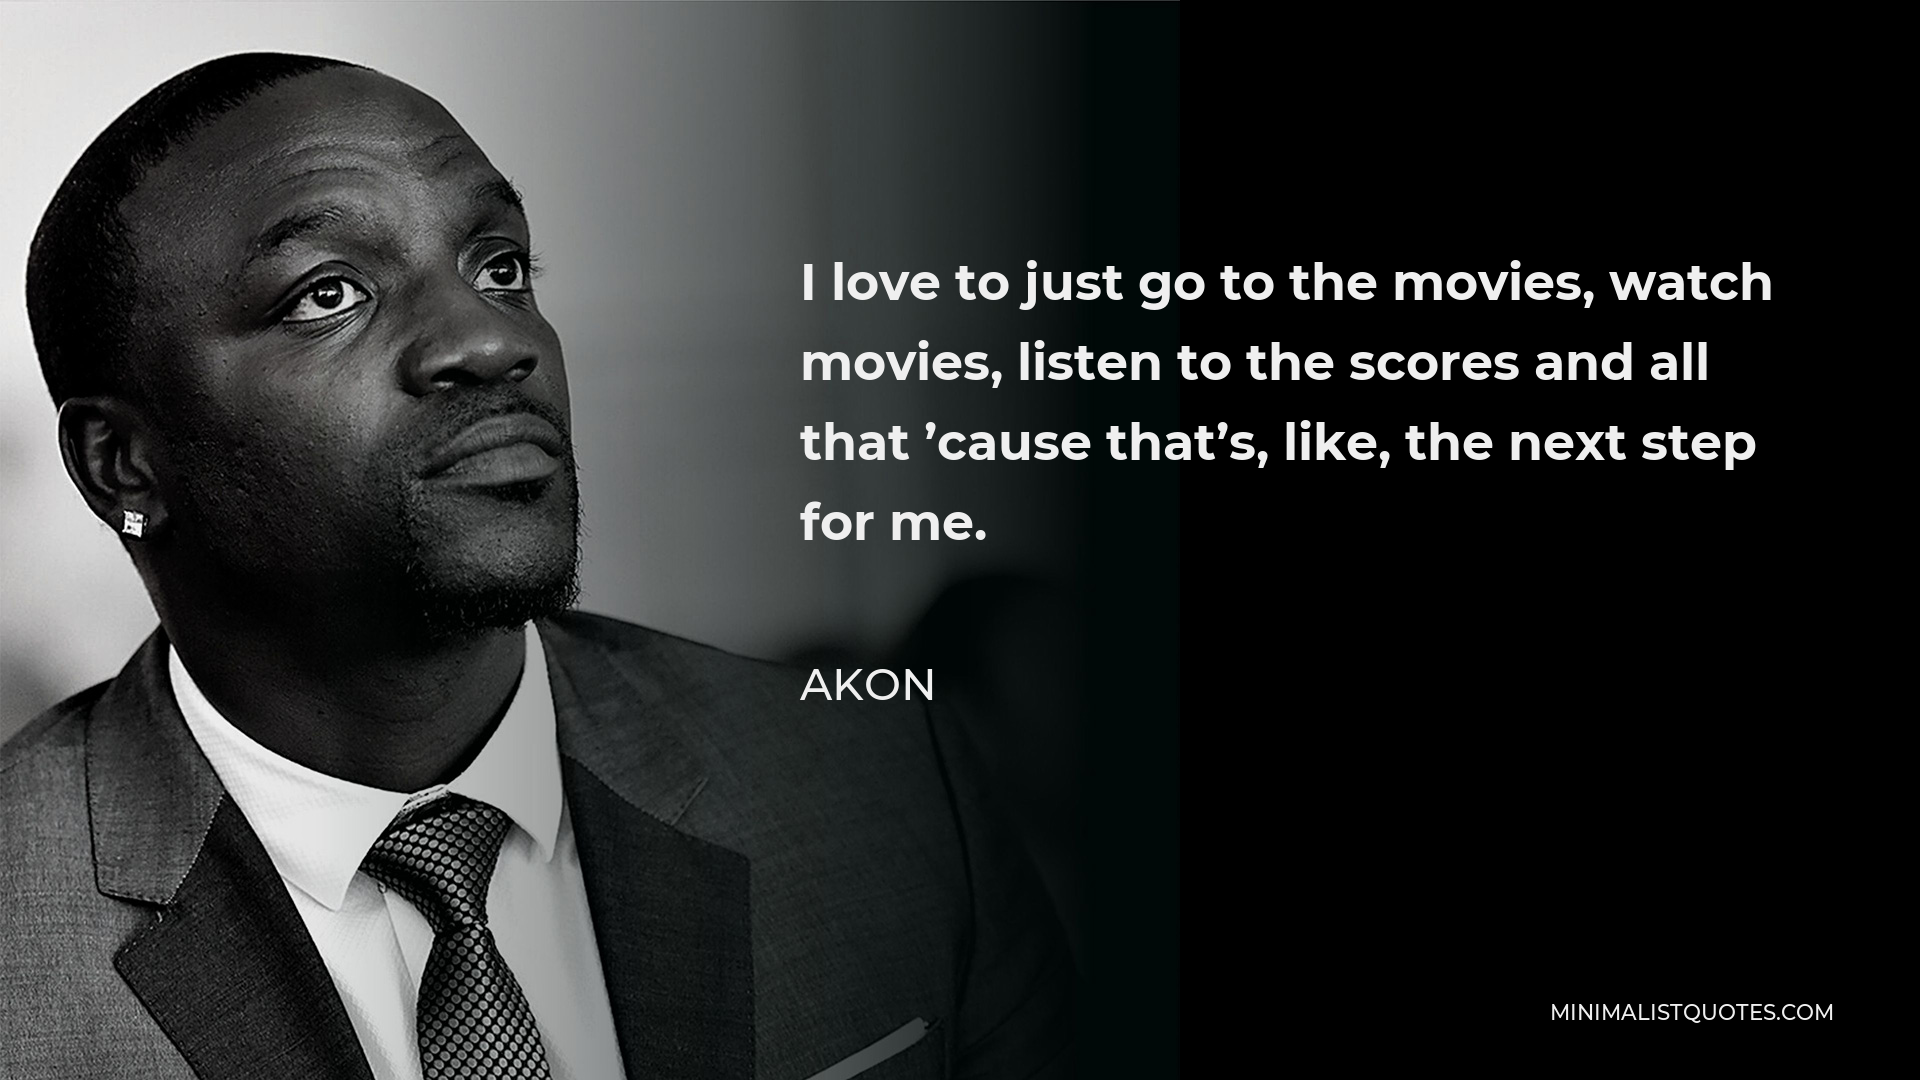 Akon Quote: I love to just go to the movies, watch movies, listen